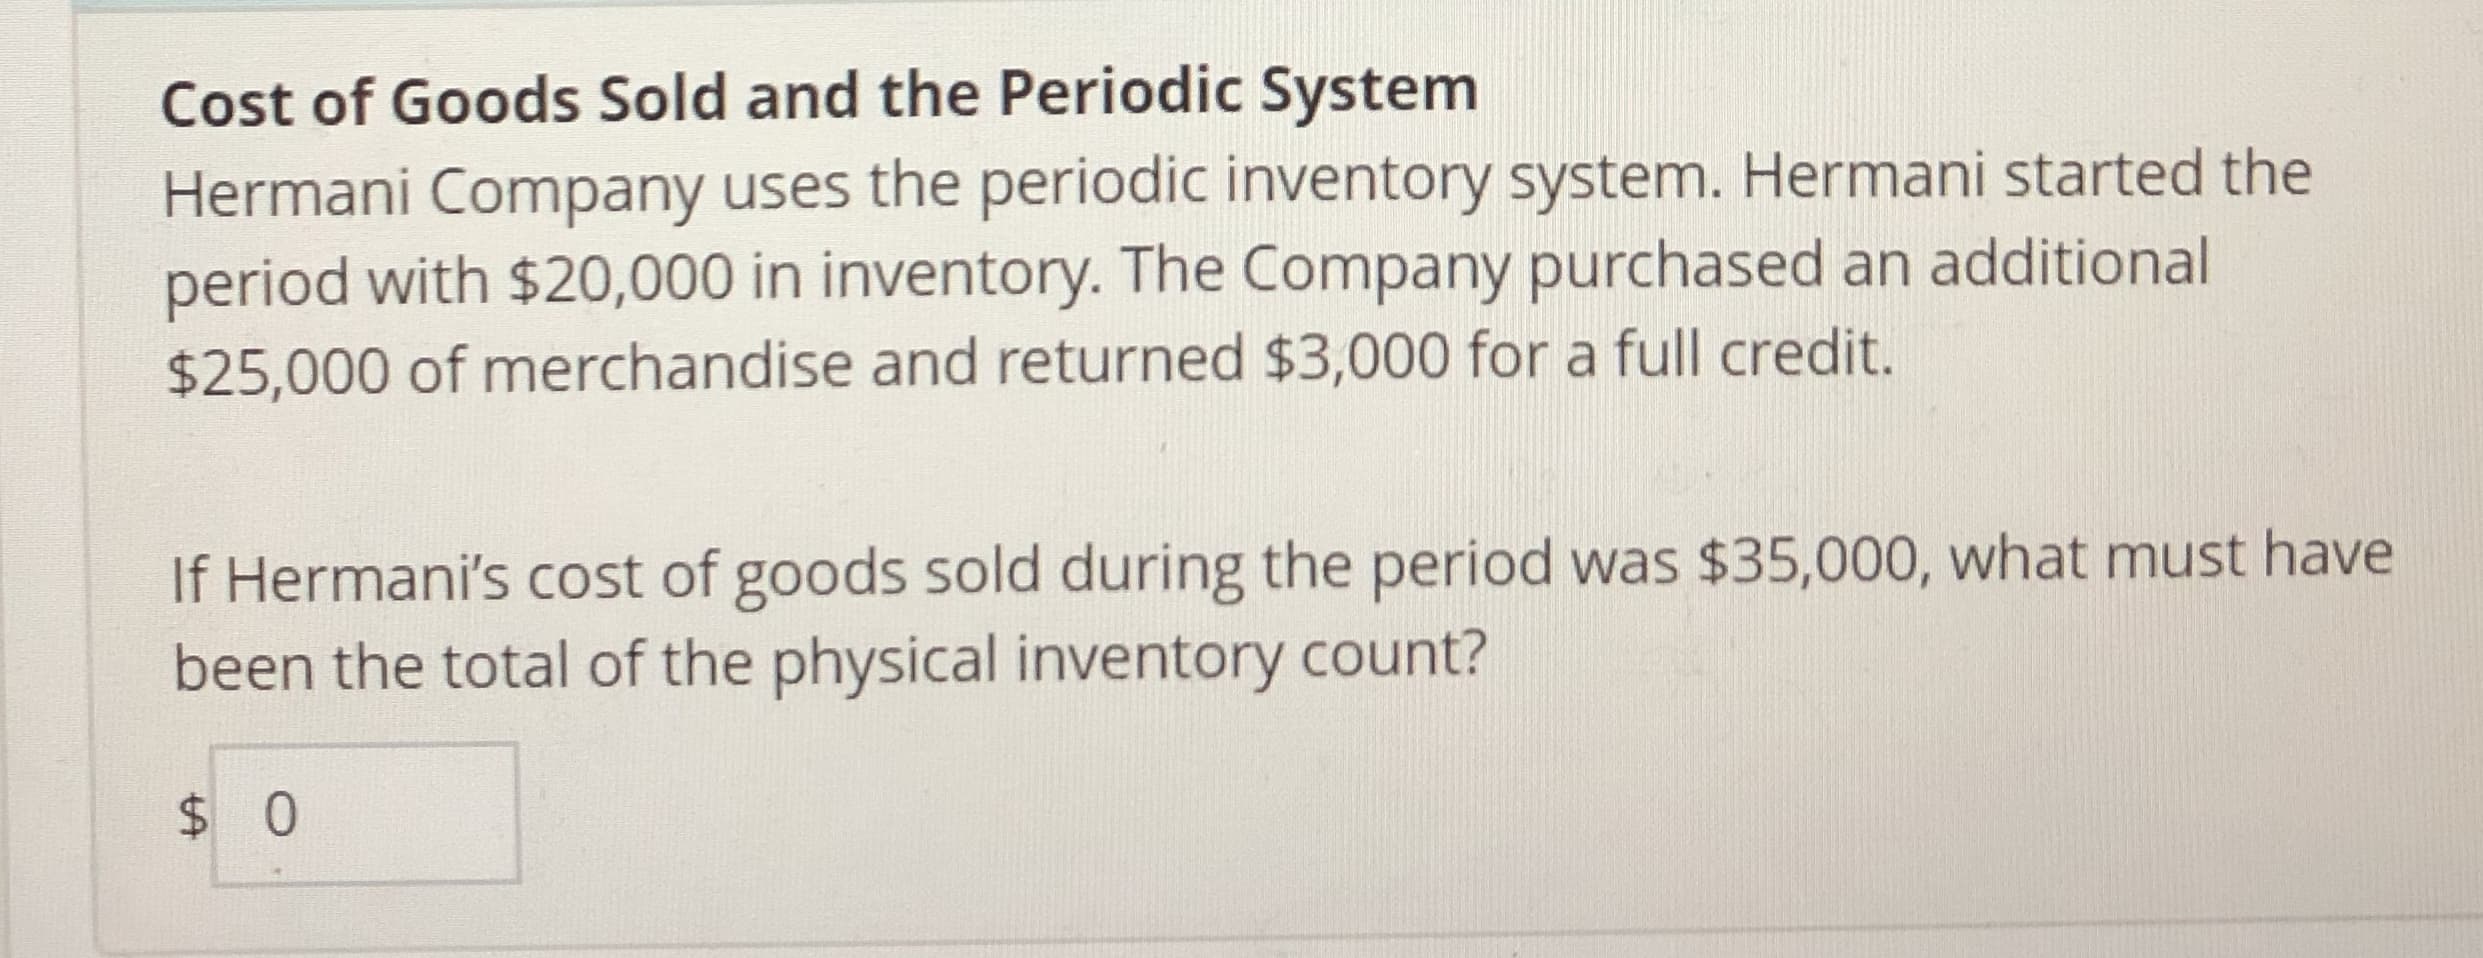 Cost of Goods Sold and the Periodic System
Hermani Company uses the periodic inventory system. Hermani started the
period with $20,000 in inventory. The Company purchased an additional
$25,000 of merchandise and returned $3,000 for a full credit.
If Hermani's cost of goods sold during the period was $35,000, what must have
been the total of the physical inventory count?
